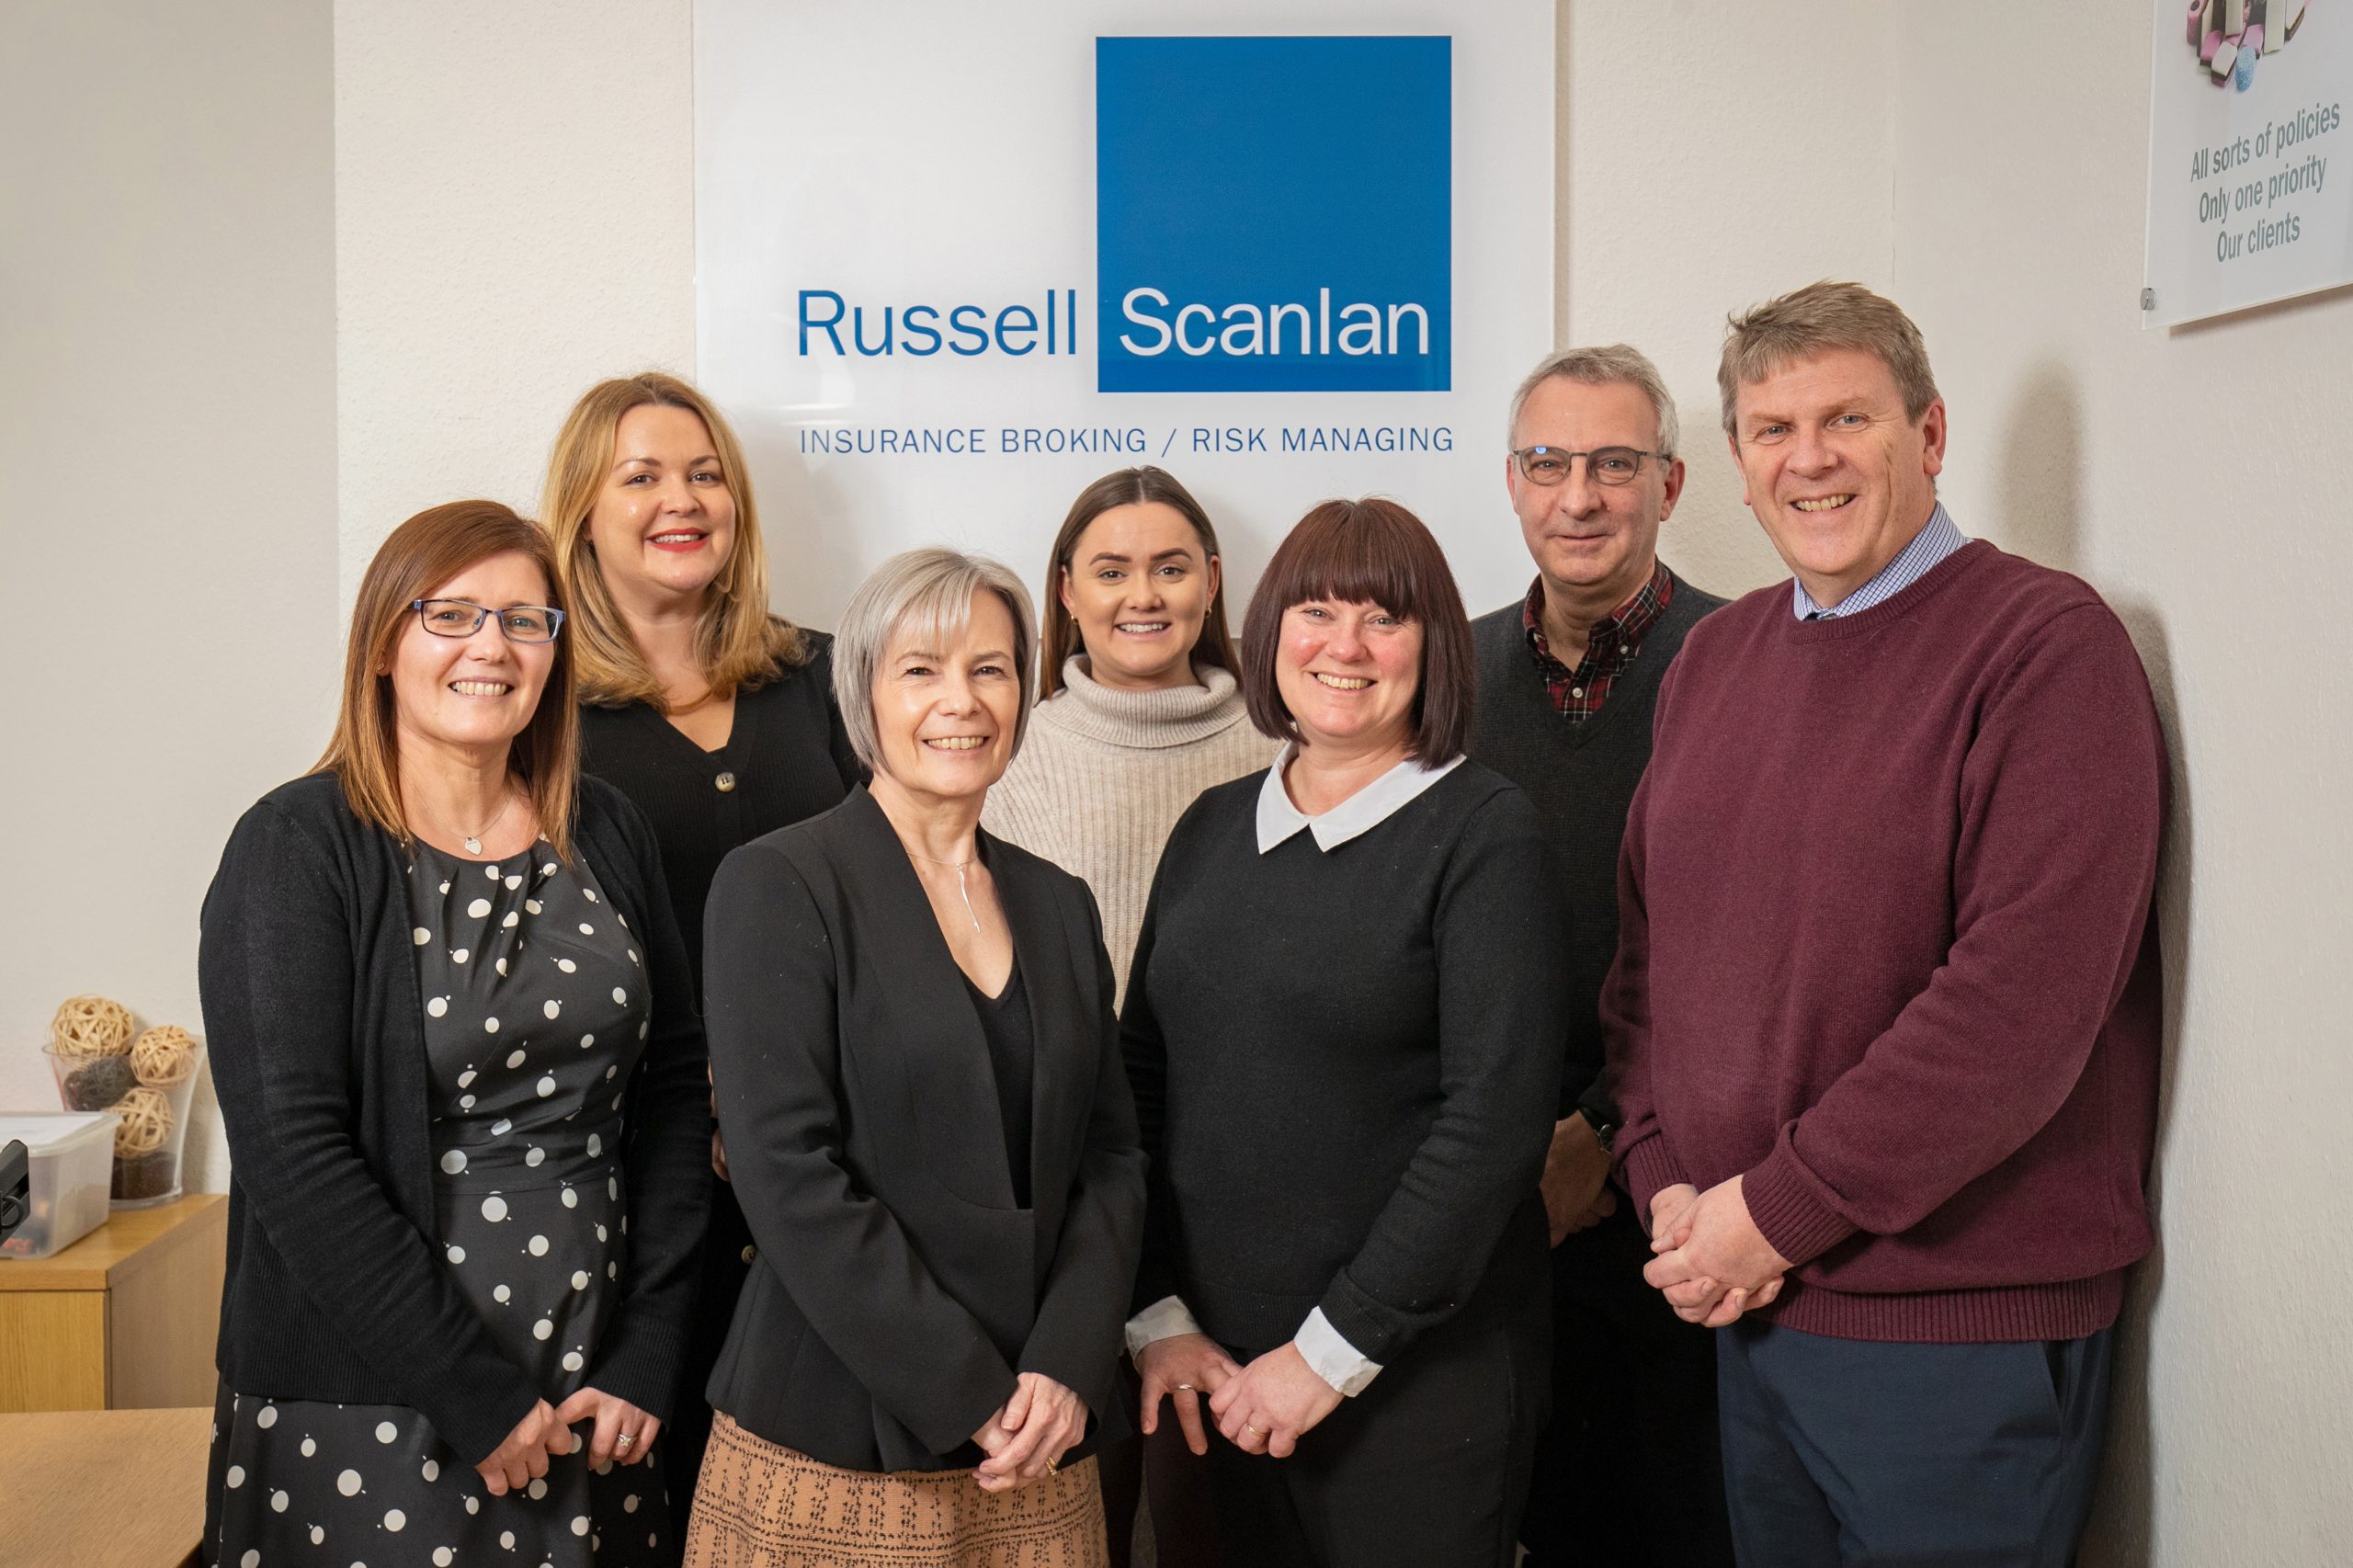 The Russell Scanlan Charity Committee